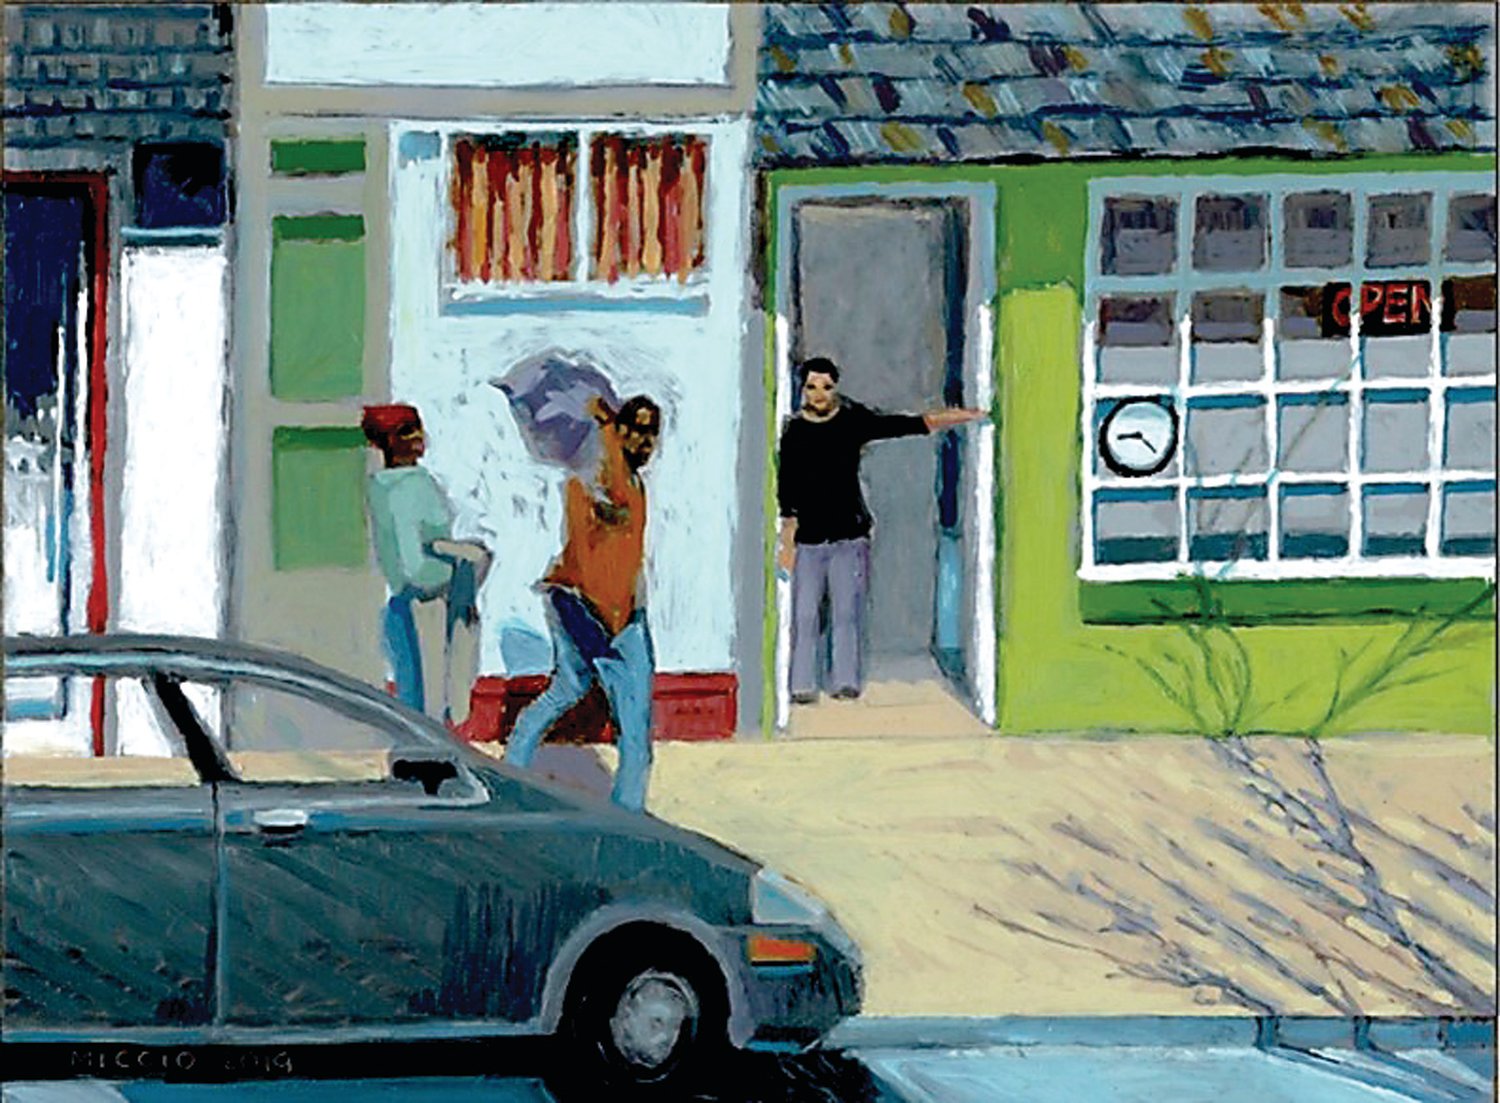 “Laundry Day, South Broad Street” is by Marge Miccio.